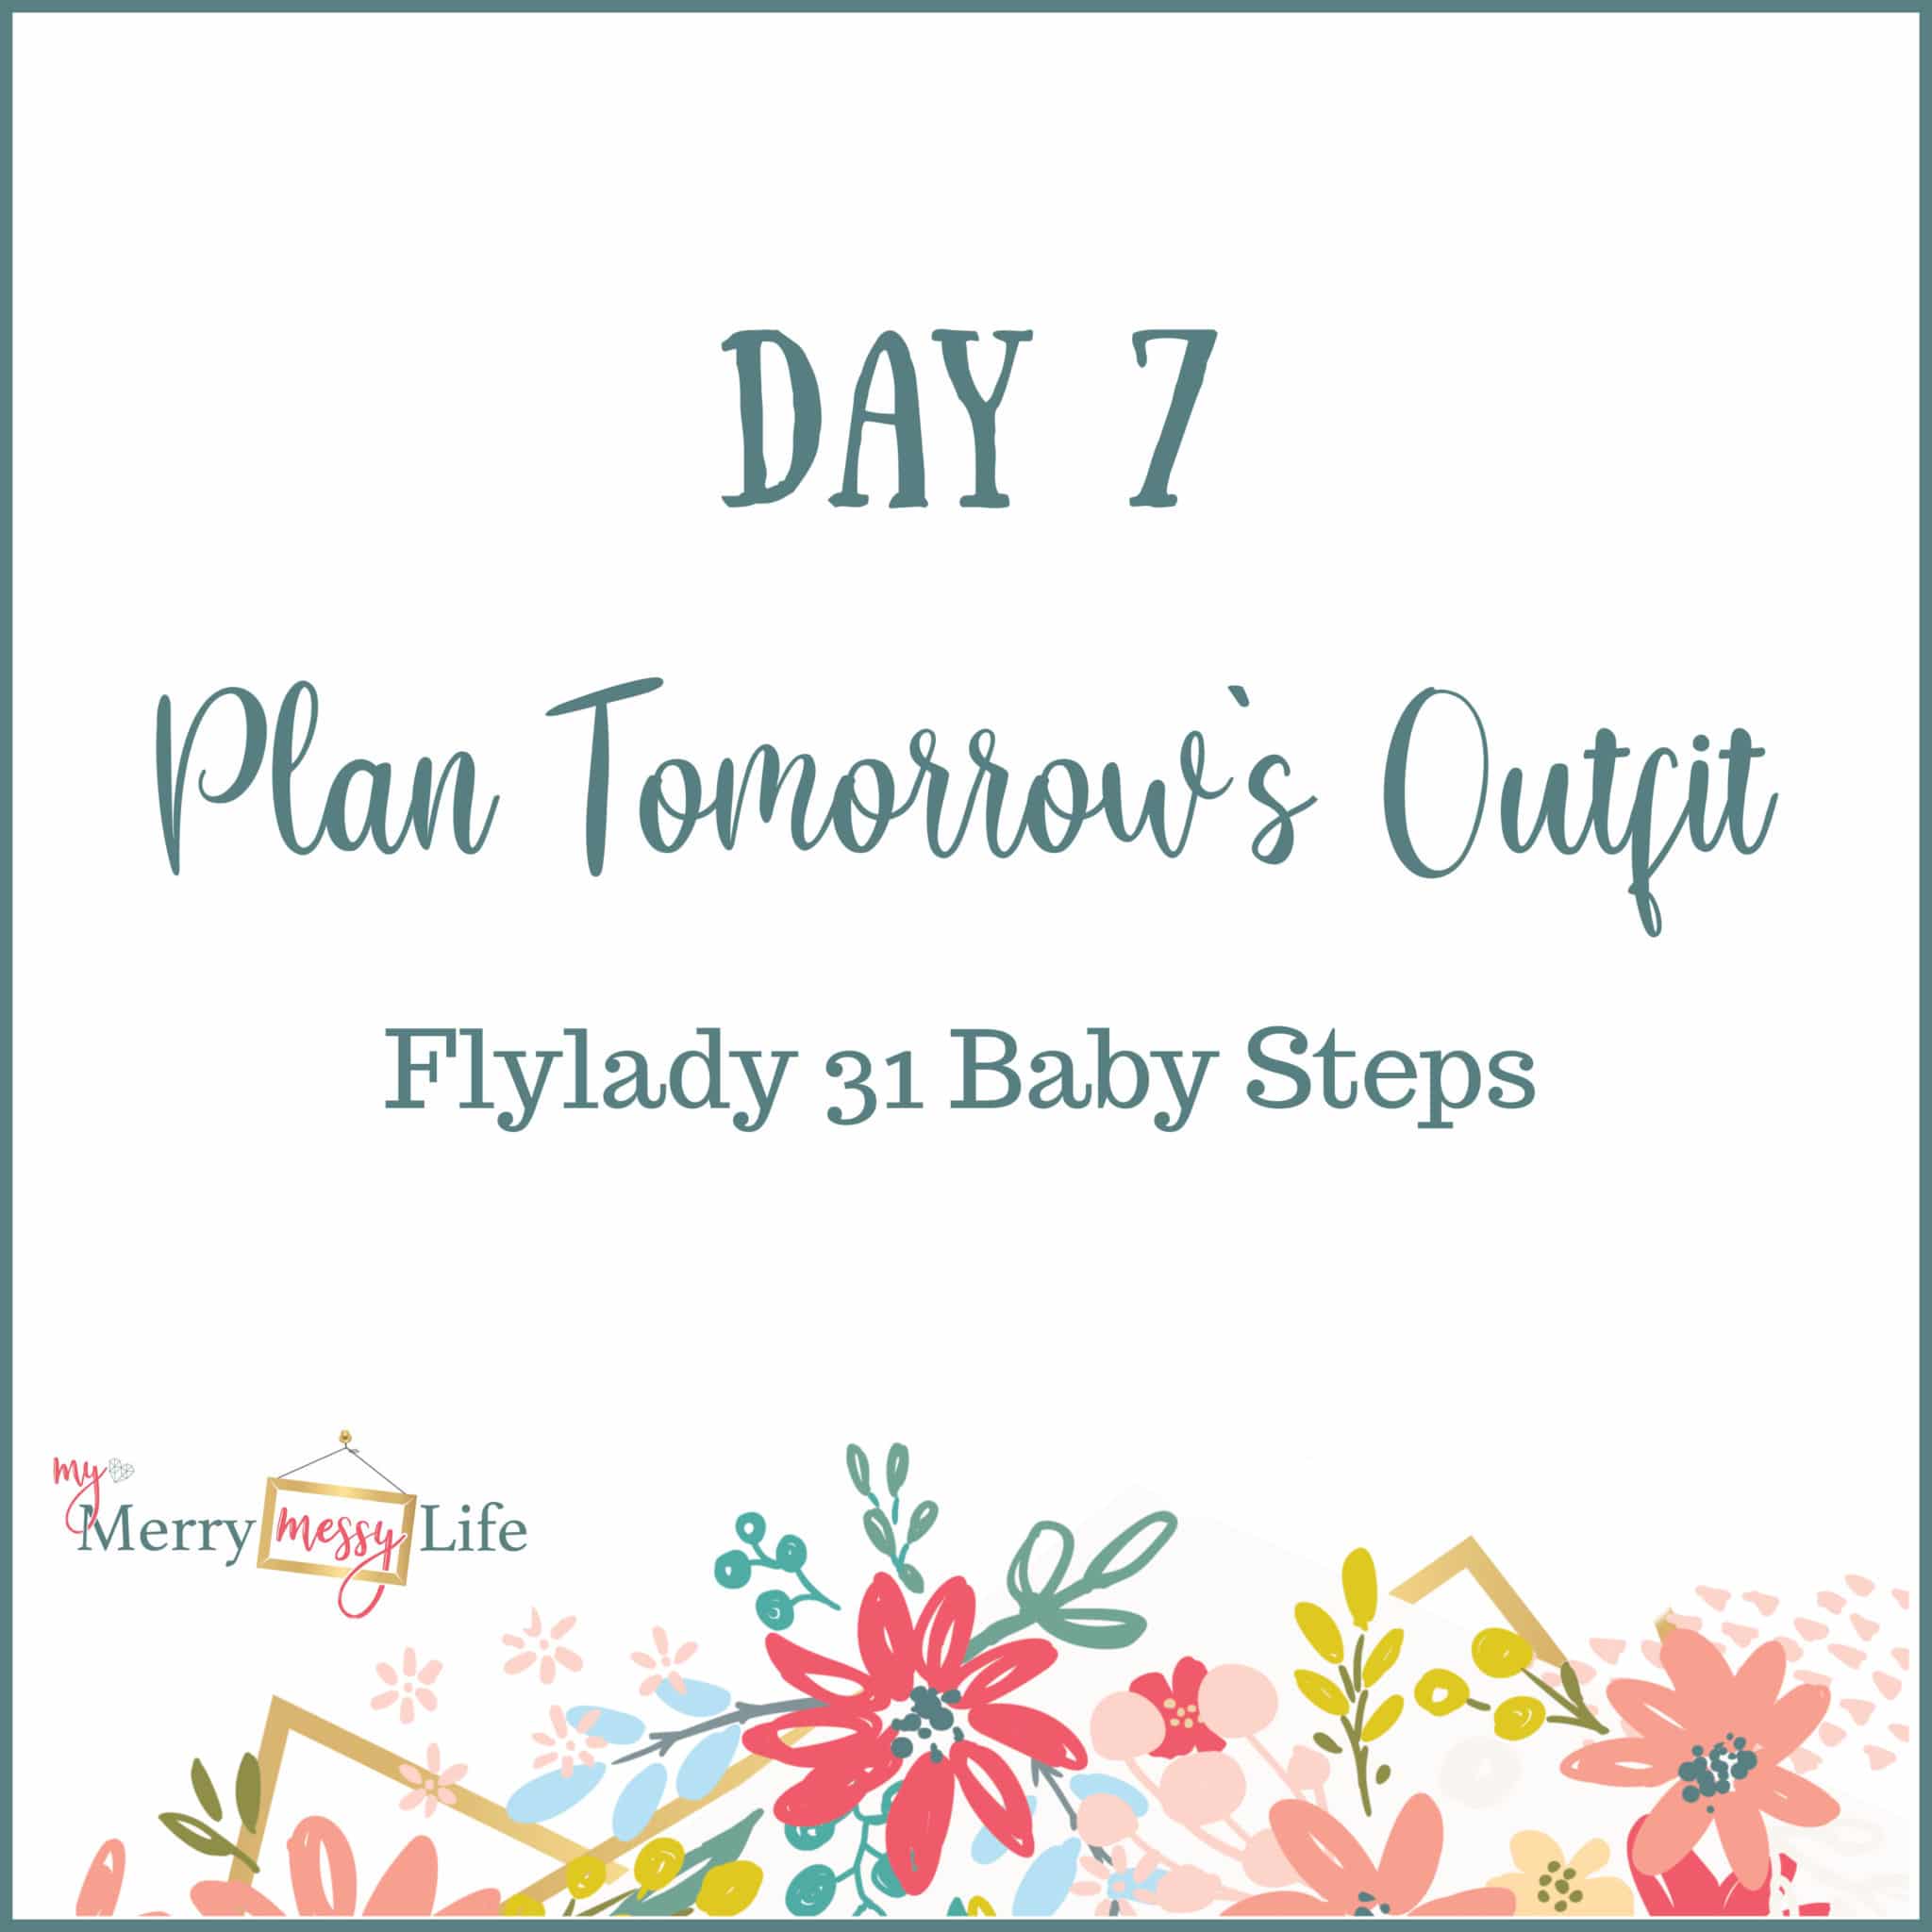 Flylady 31 Baby Steps - Day 7 - Plan Tomorrow's Outfit